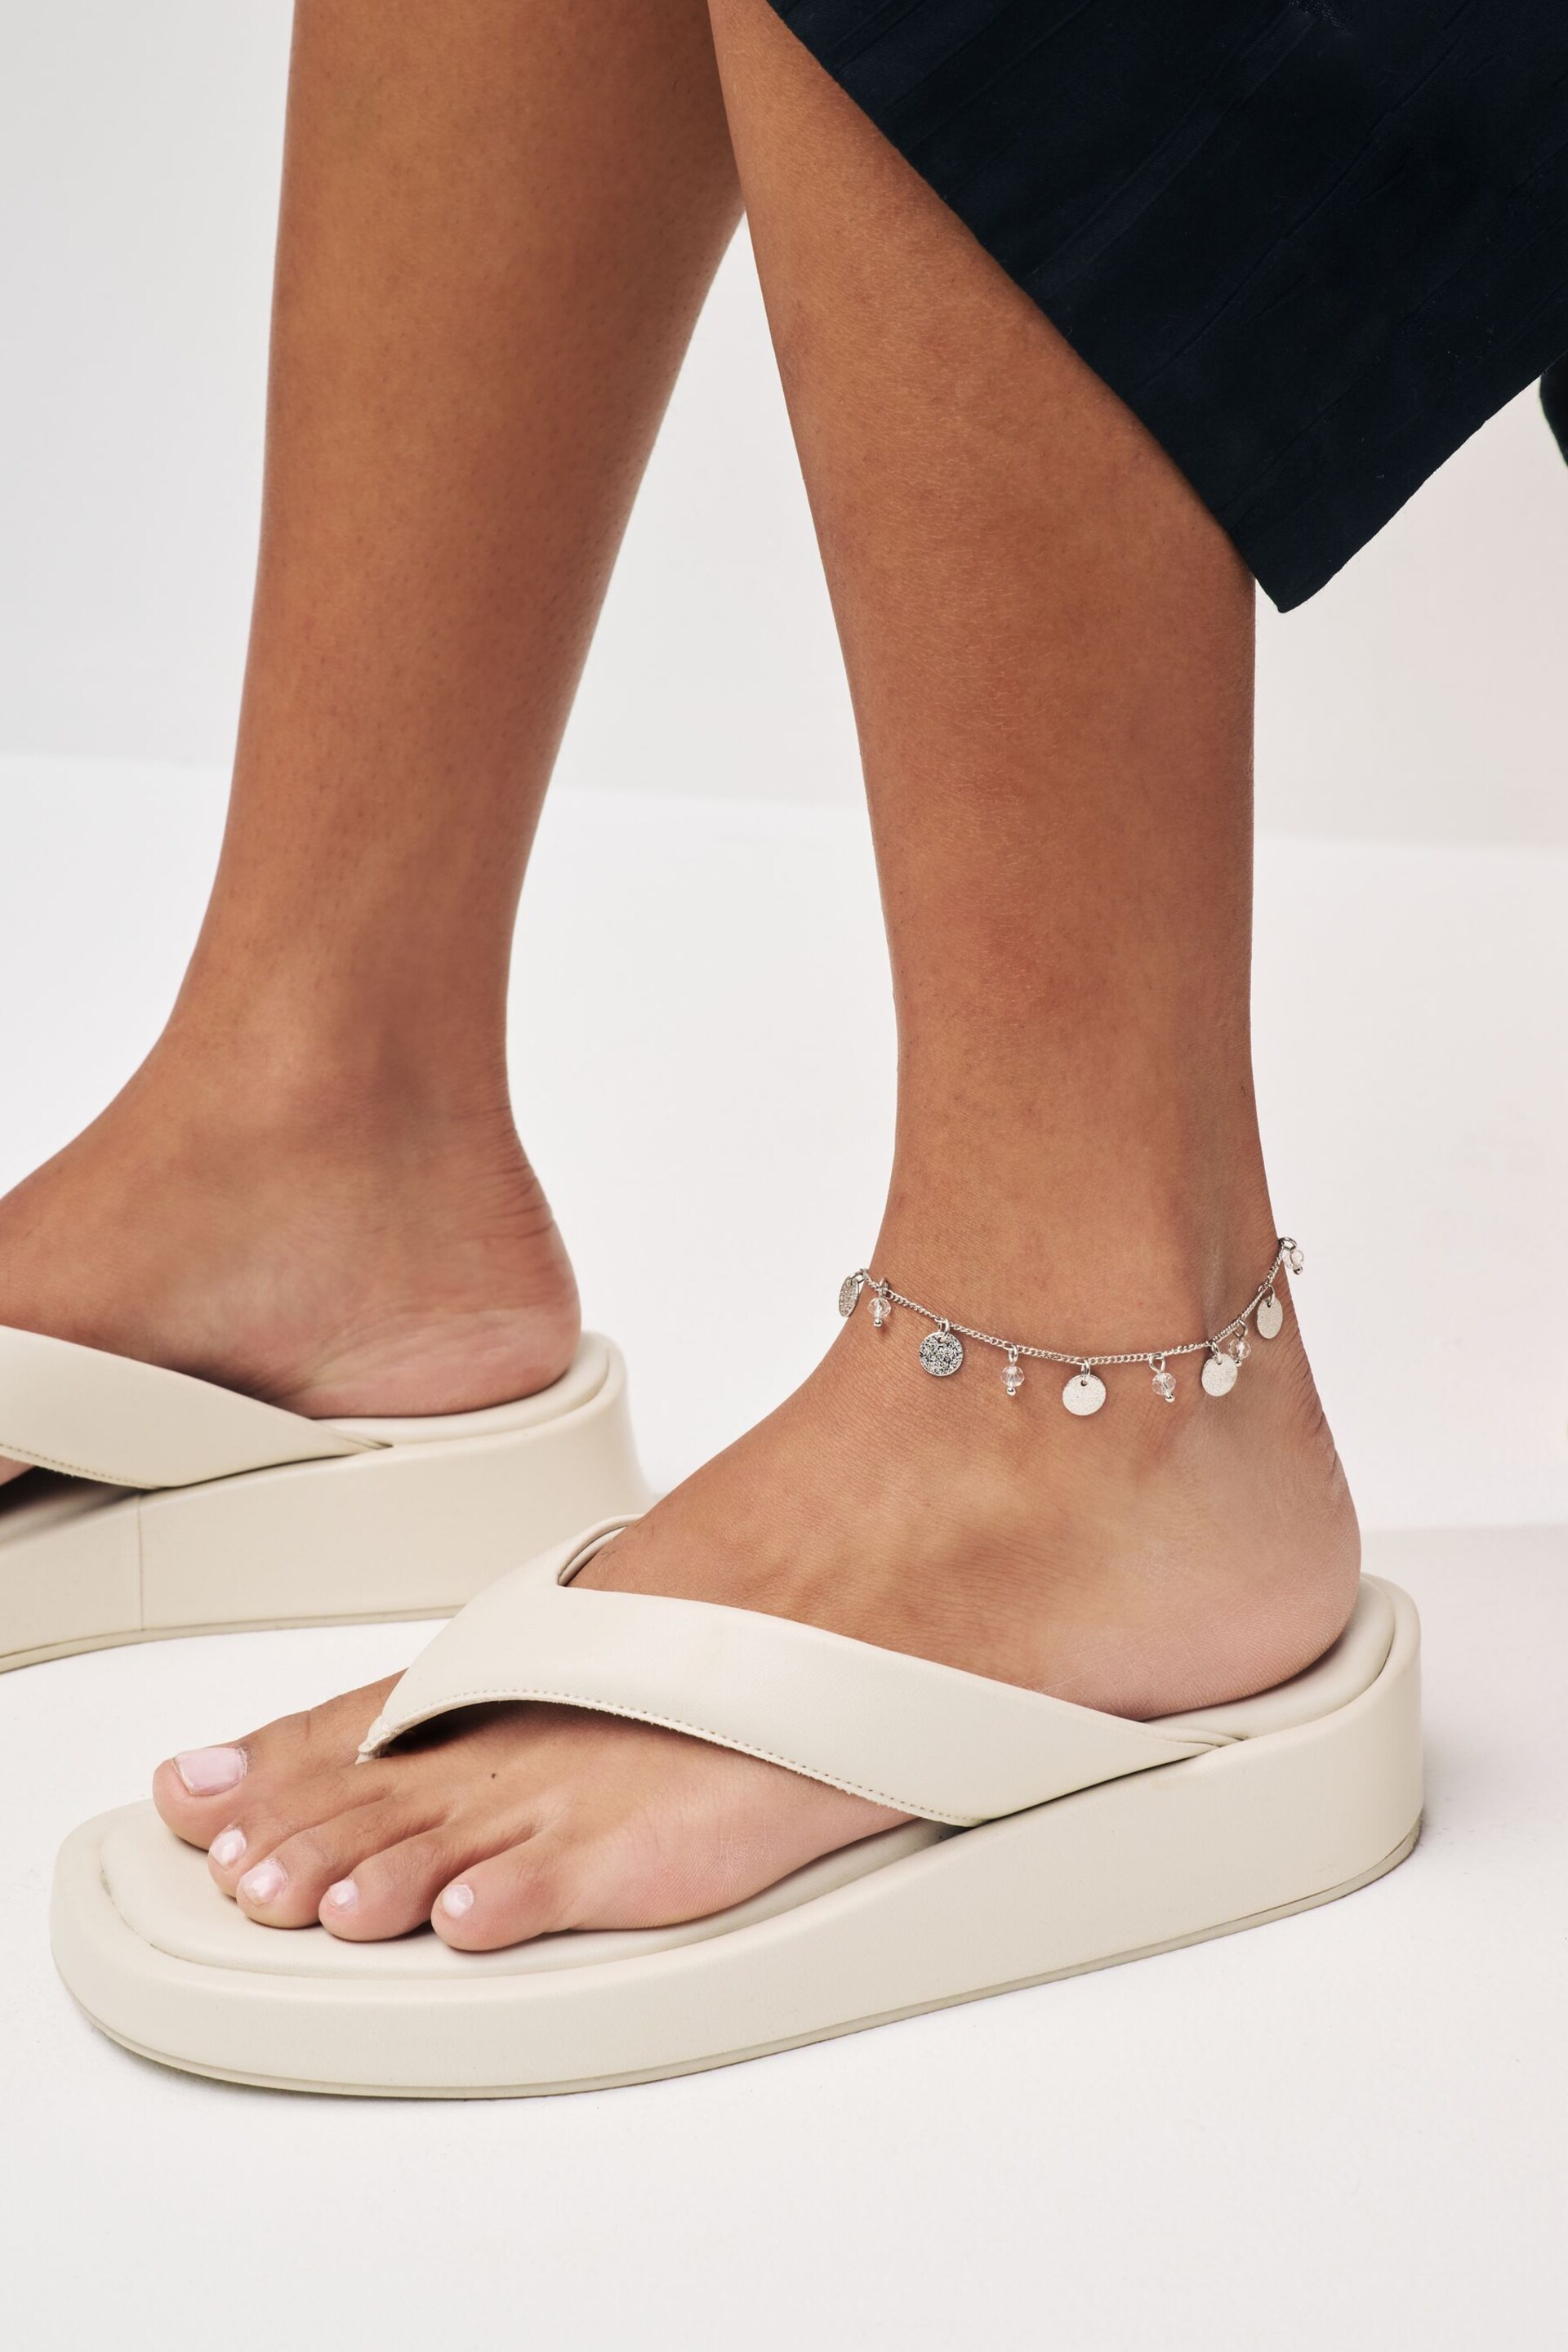 Silver Tone Disc Anklet - Image 3 of 4